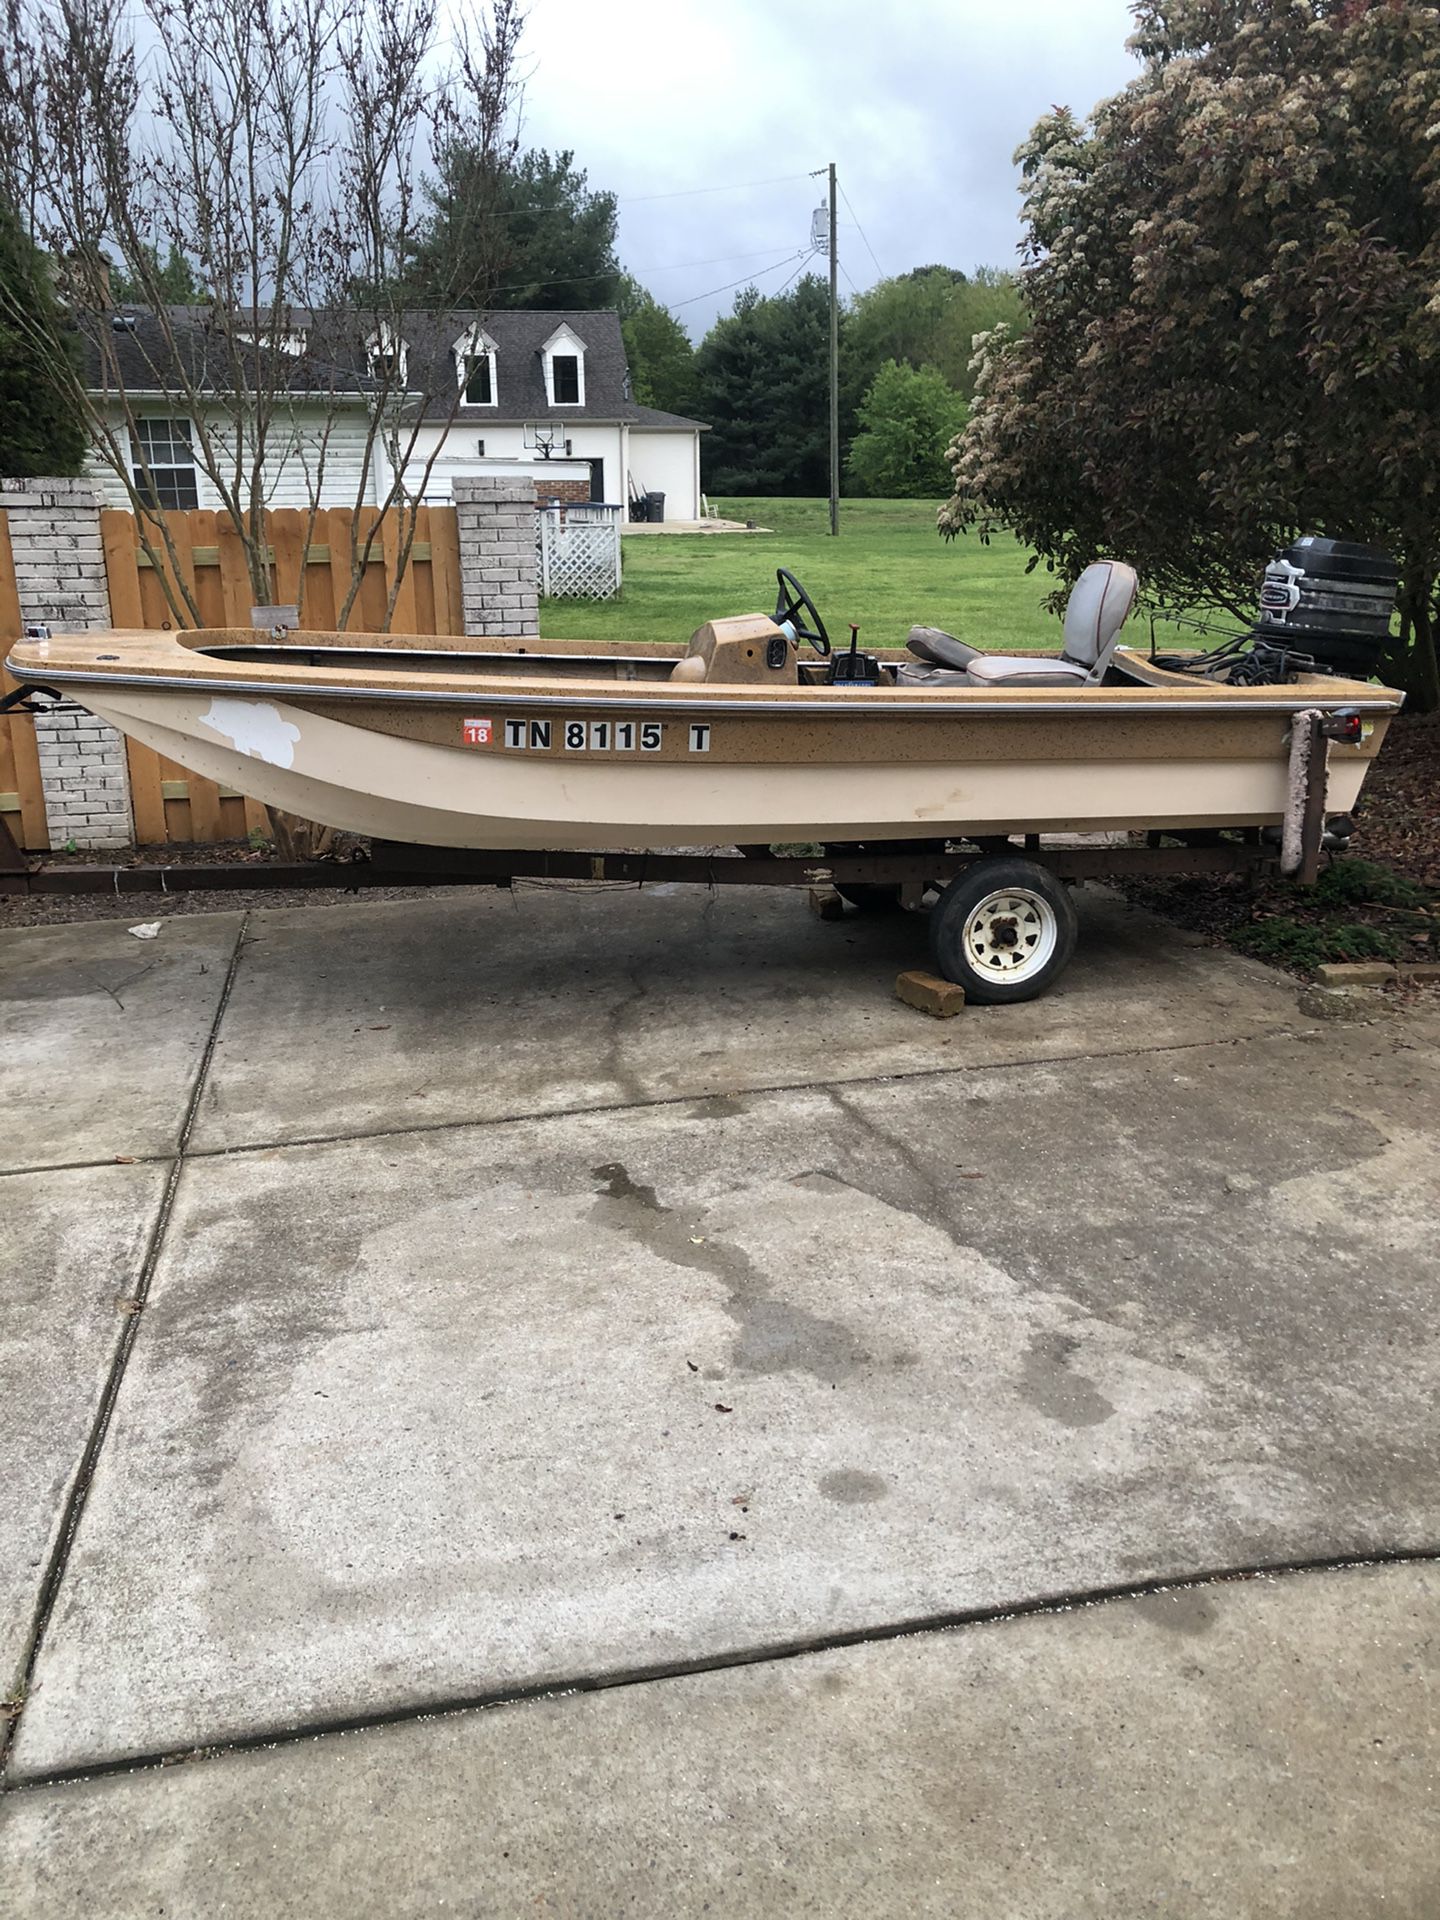 Astroglass bass fishing boat for Sale in Brentwood, TN - OfferUp